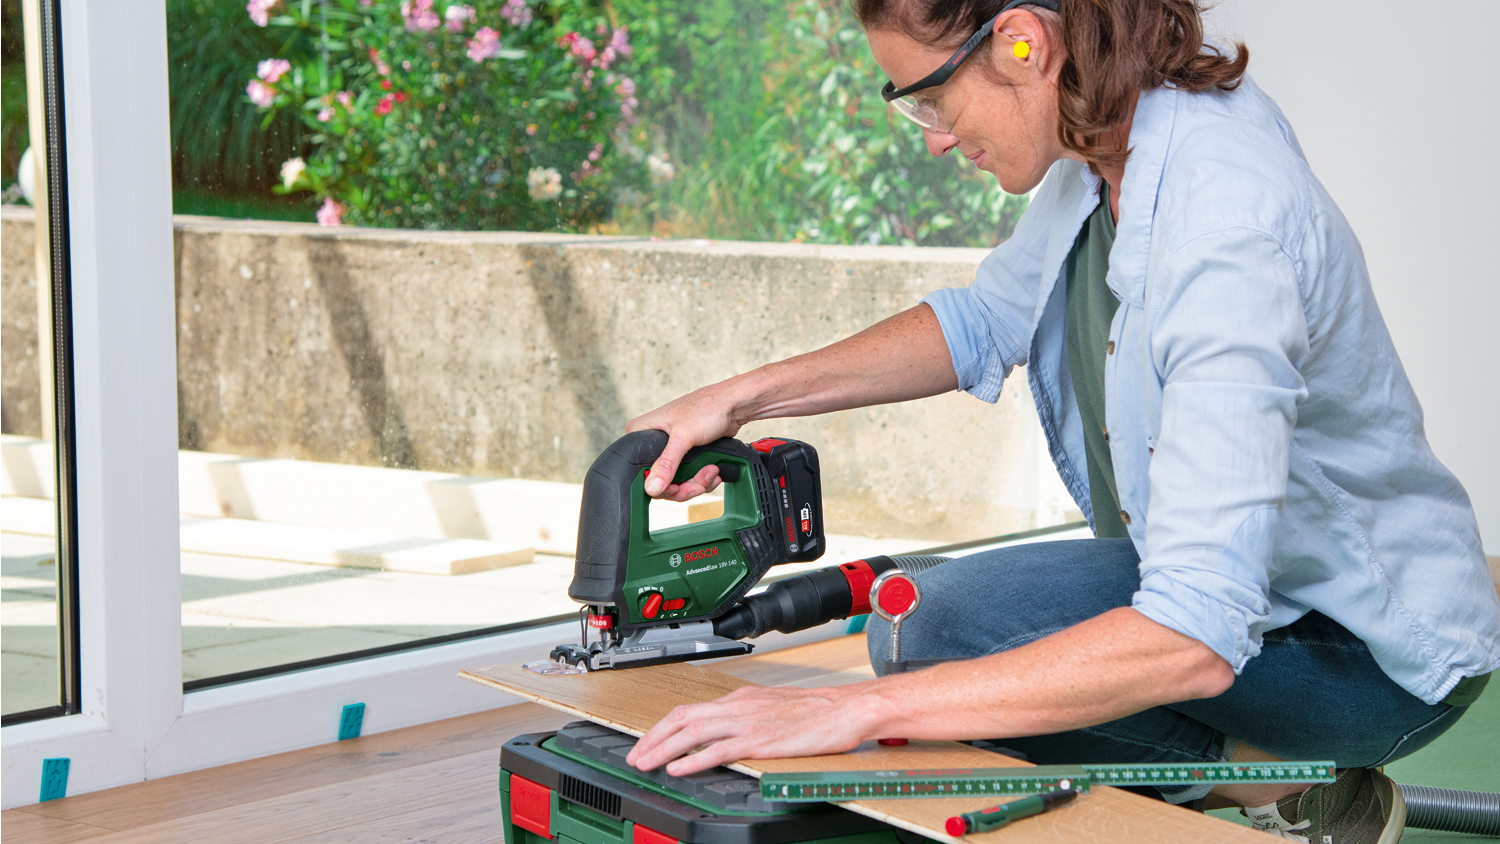 New cordless jigsaw from Bosch for DIYers: Improved dust extraction for a clear view of the cutting line